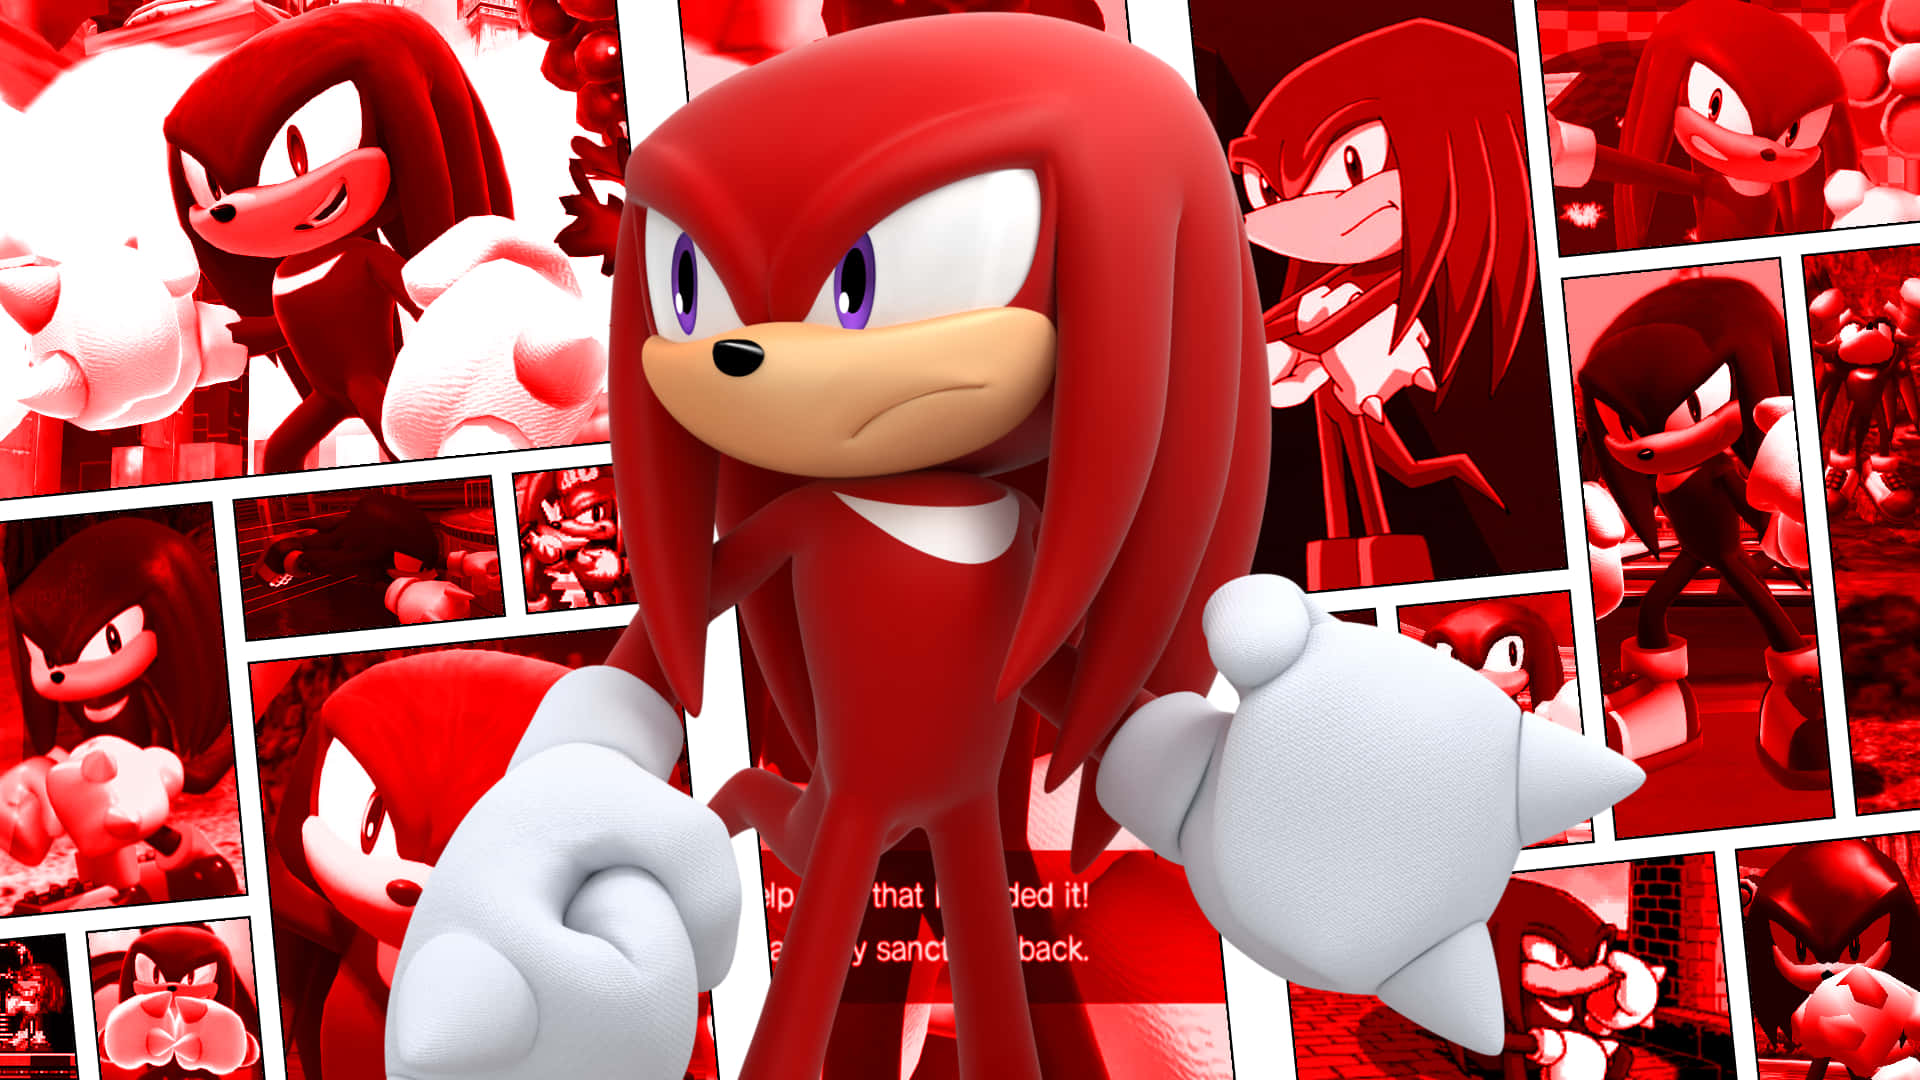 Channel your inner power with Knuckles! Wallpaper